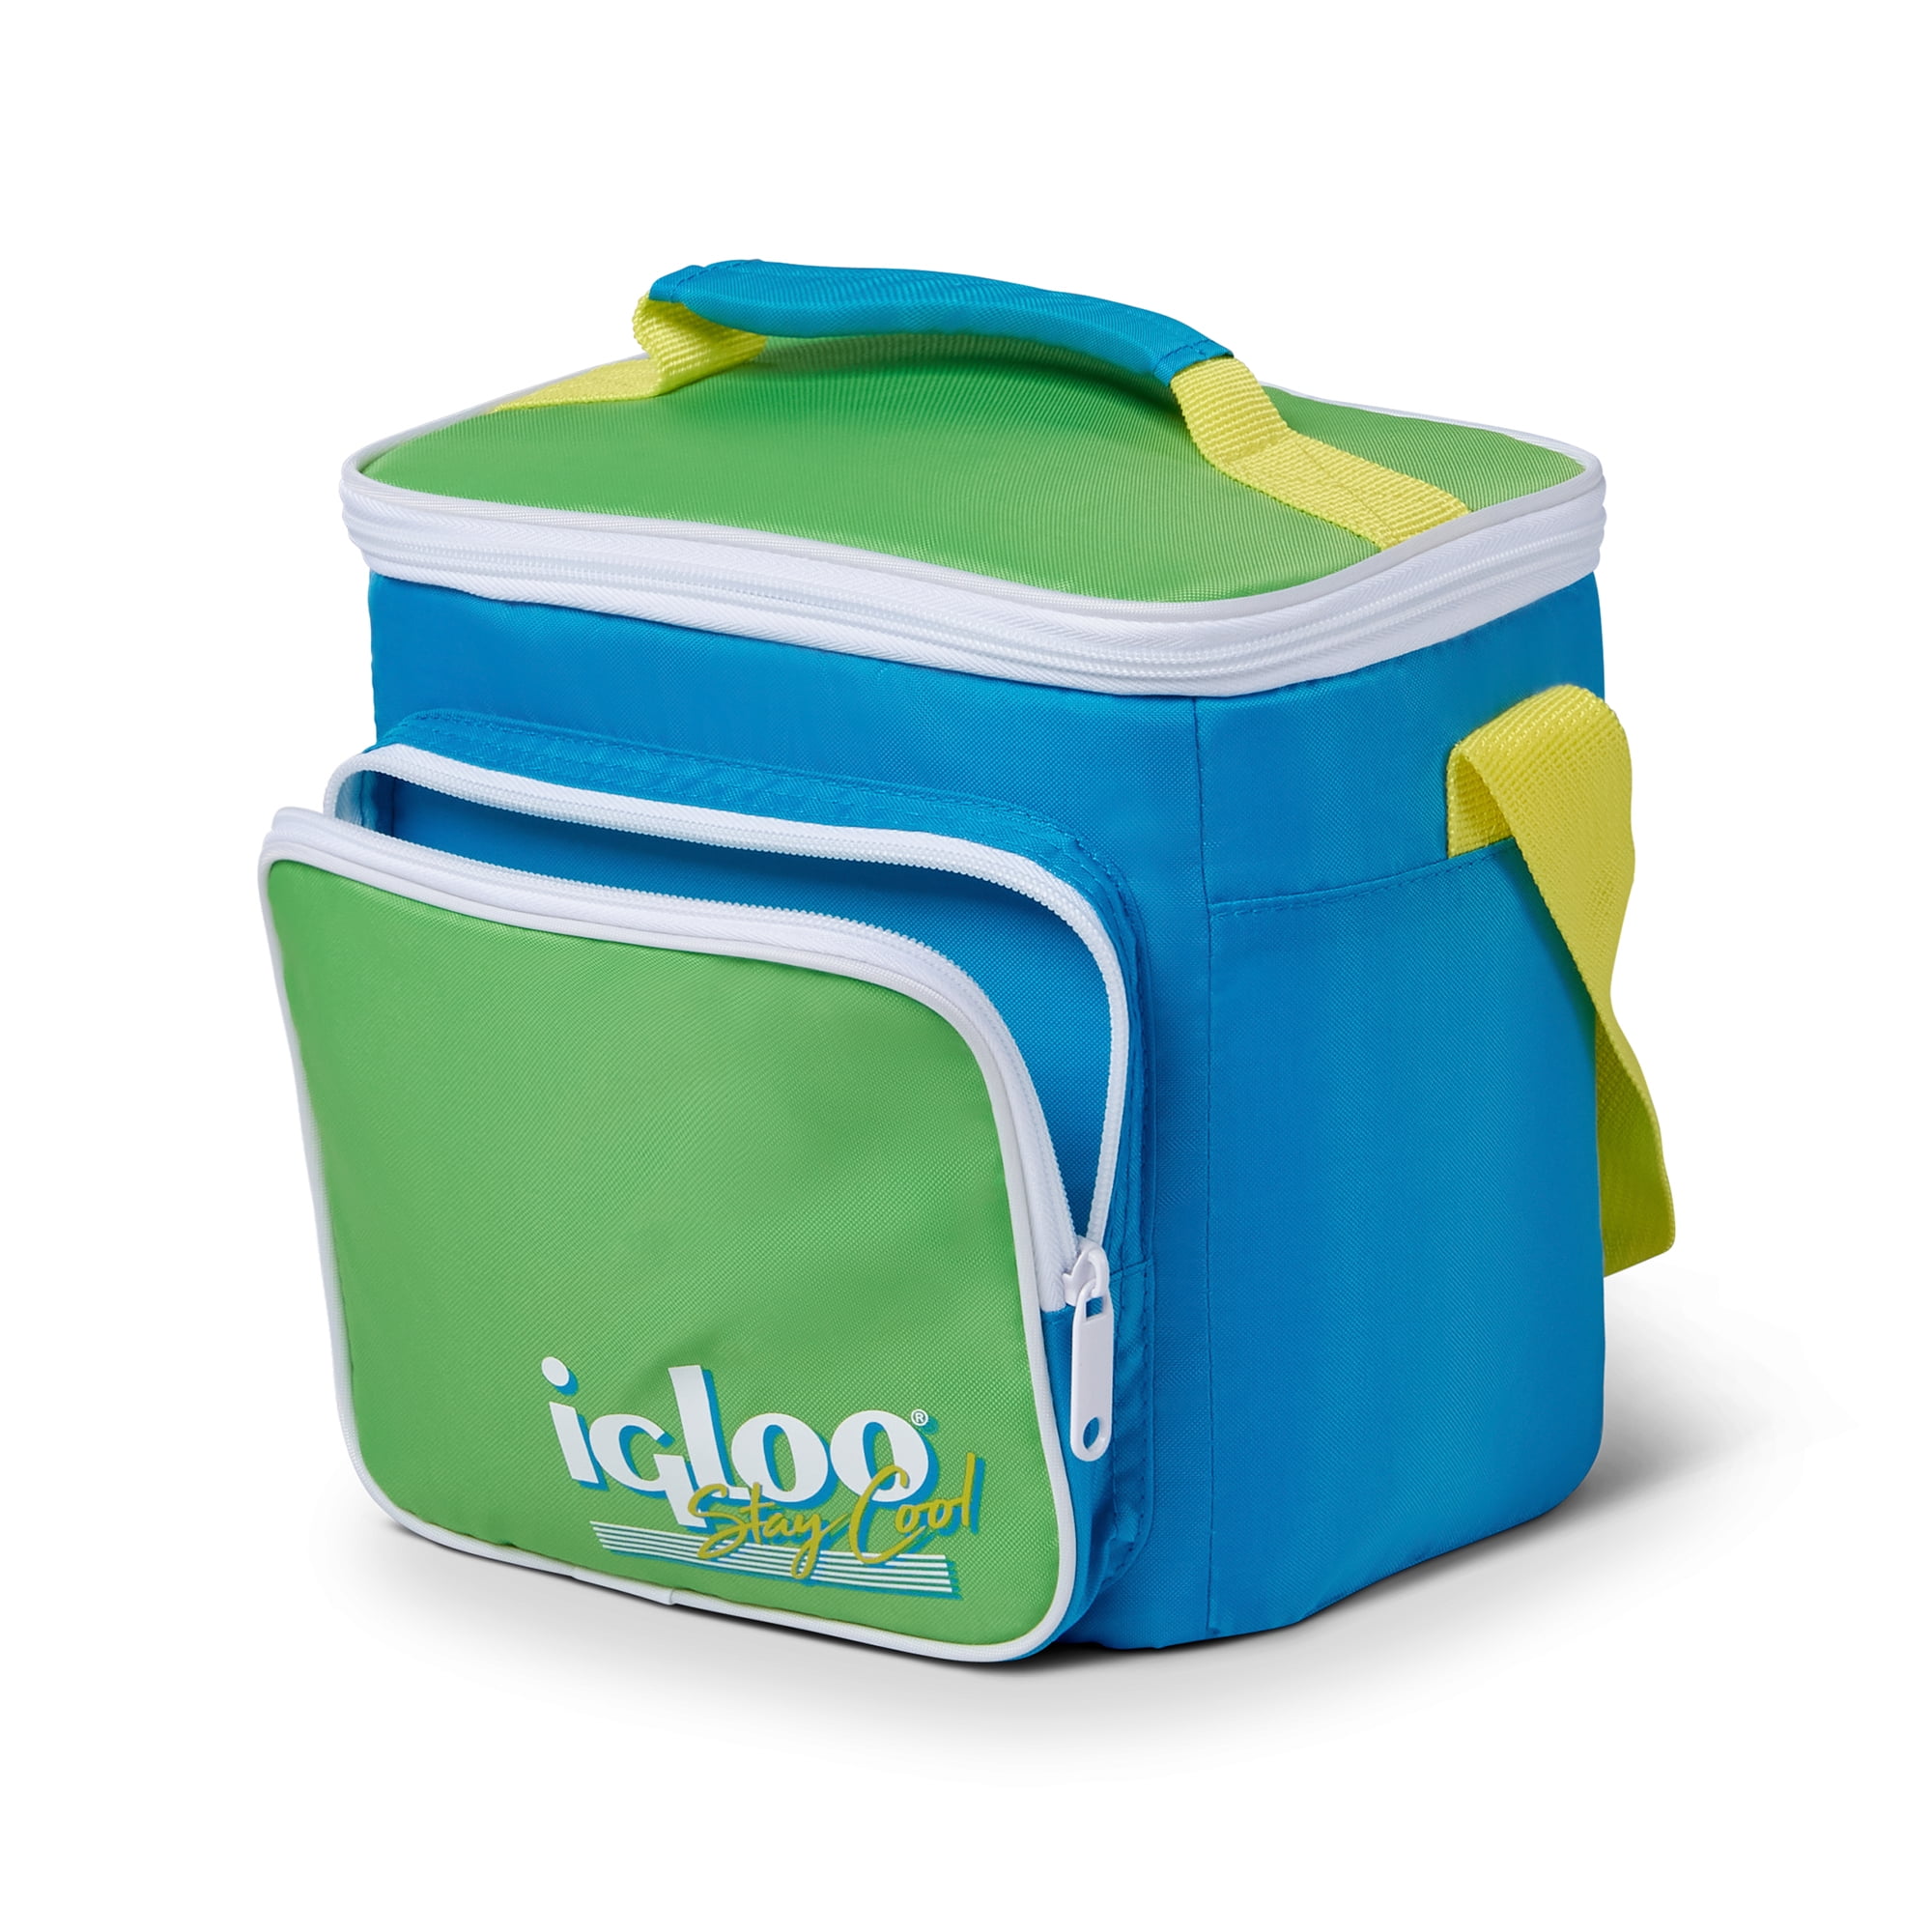 Igloo 90s Retro Collection Square Neon Lunch Box Cooler Bag, Purple